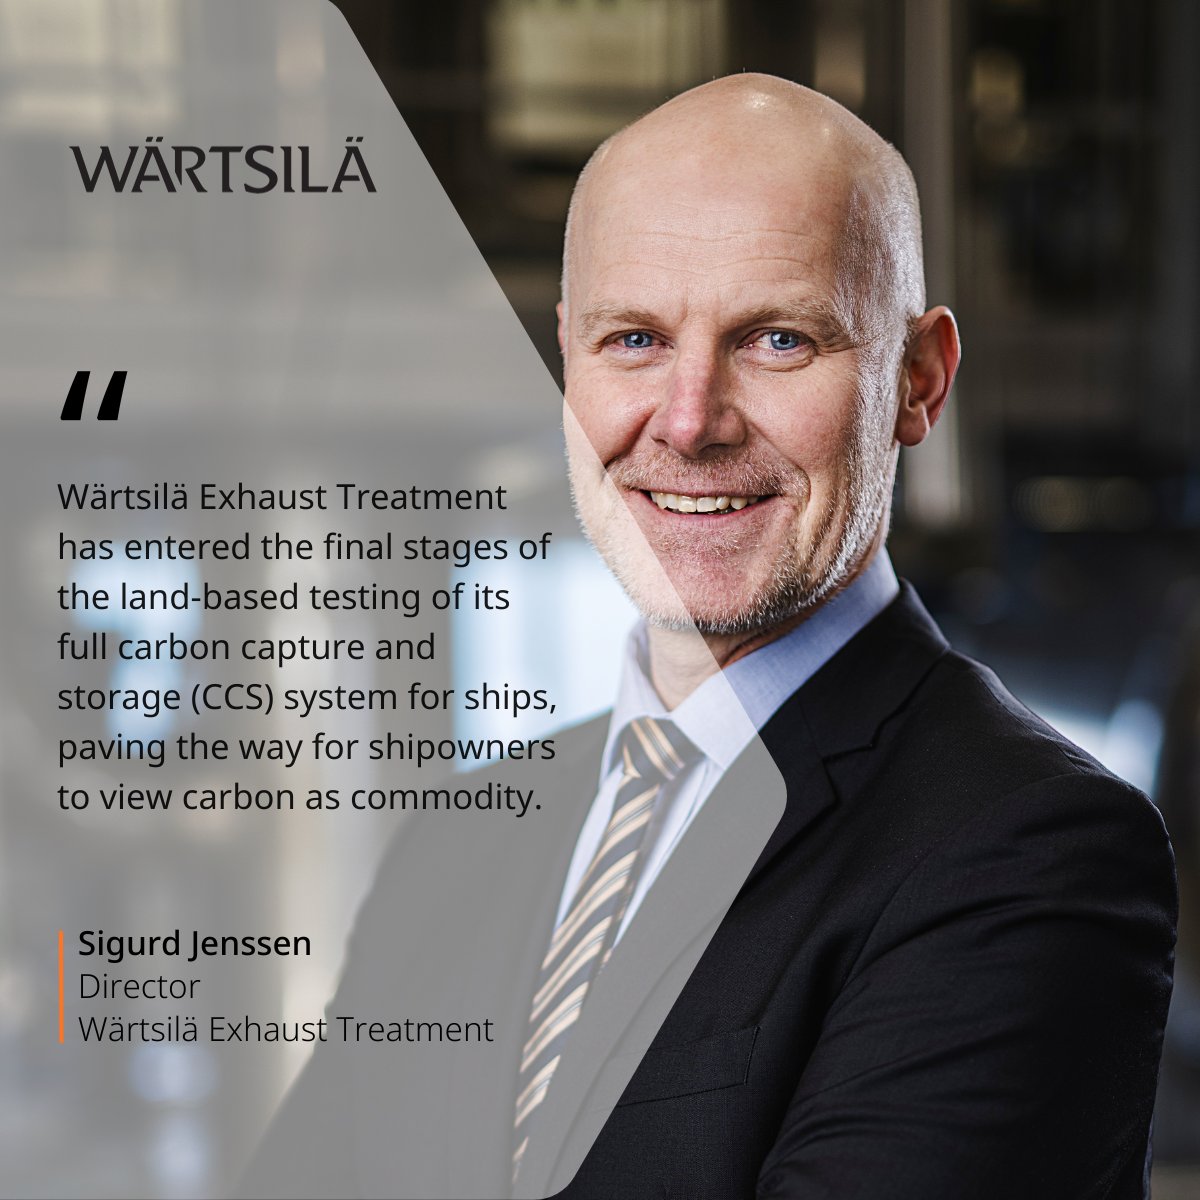 Sigurd Jenssen from Wärtsilä Exhaust Treatment shares insights with Energy Engineering Magazine on reaching an important milestone in bringing #CarbonCapture & storage #technology to the market, Read more (p.16-17) 👉wartsi.ly/46qmOyx #decarbonisation #ClimateChange